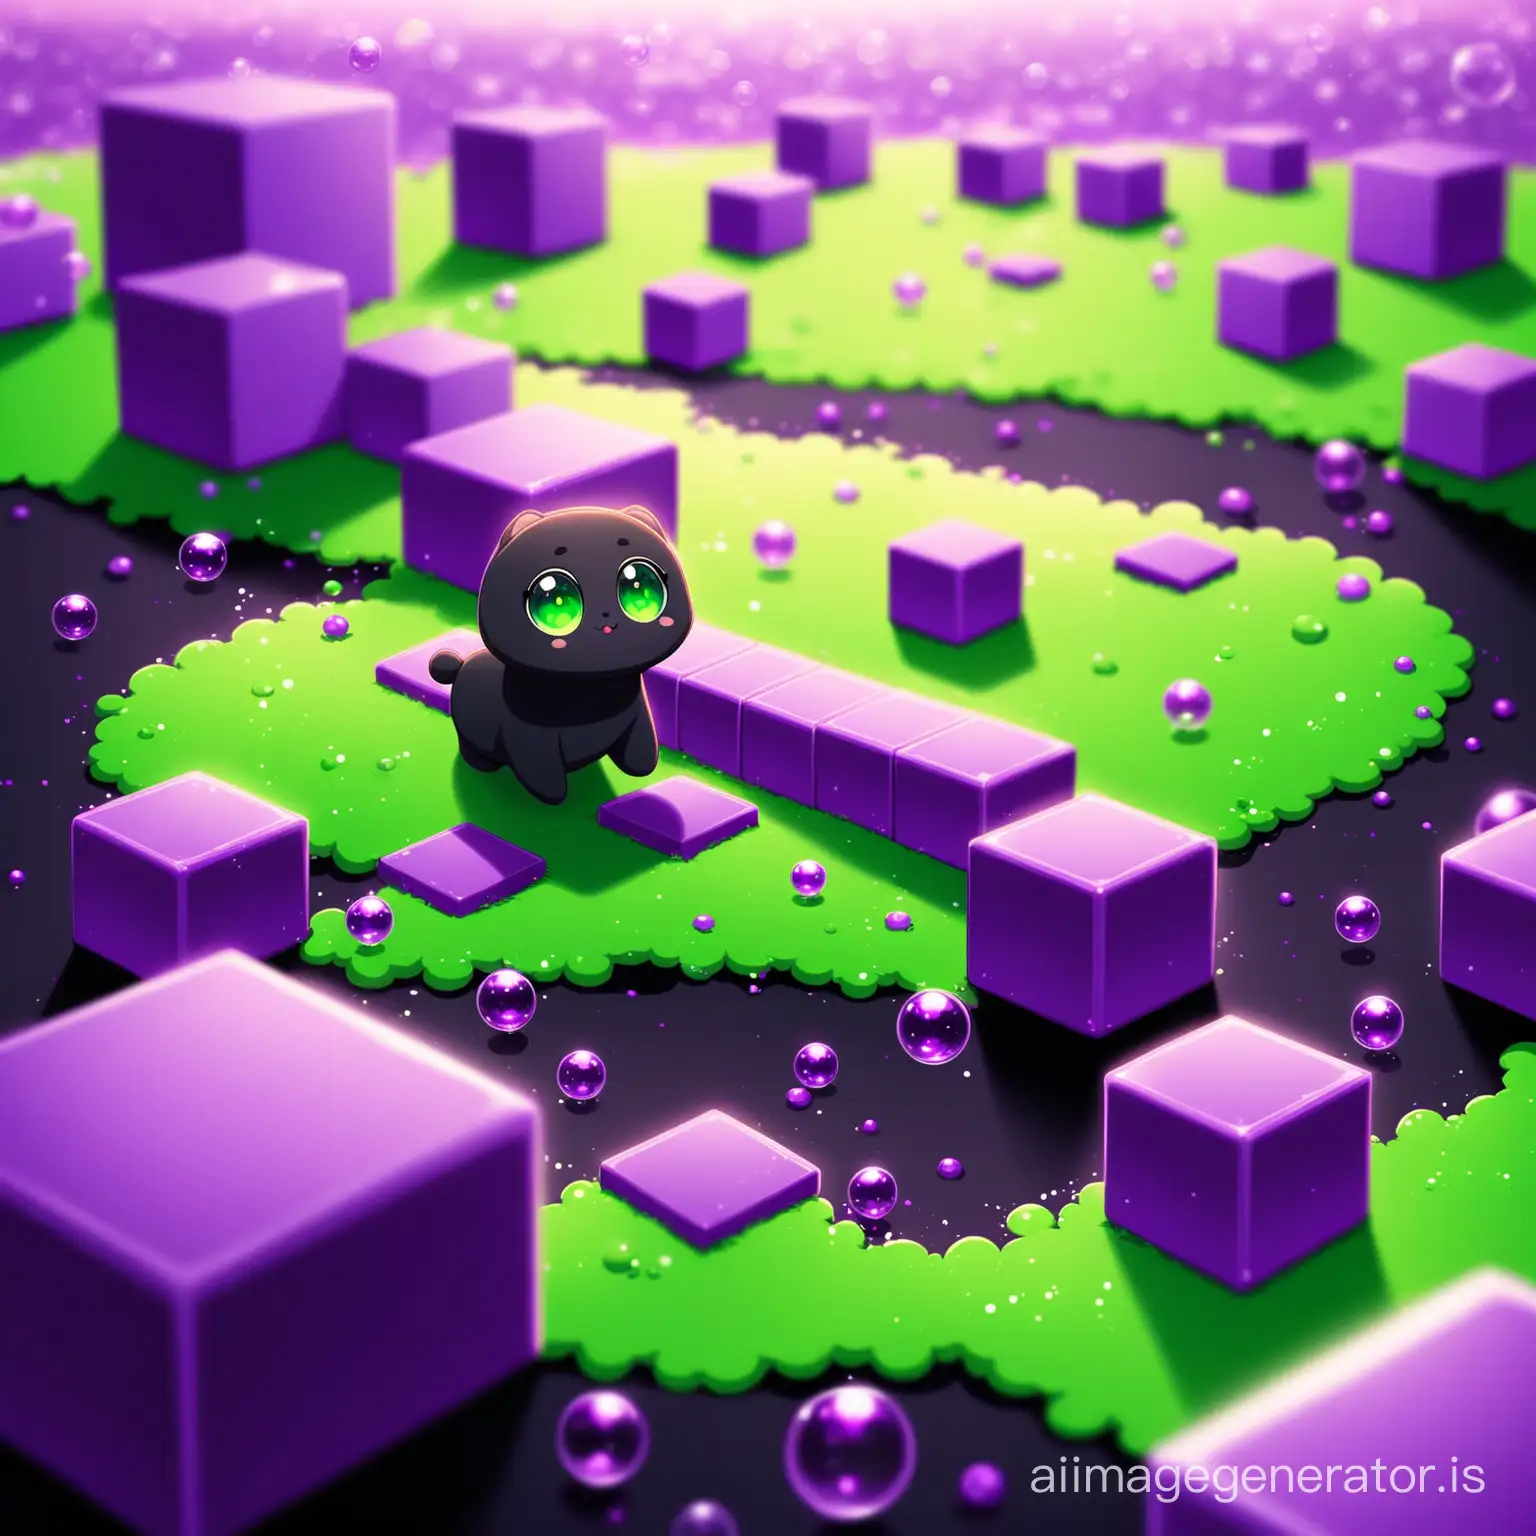 Adorable-Black-Cookie-Creature-with-Green-Eyes-Roaming-in-Purple-Landscape